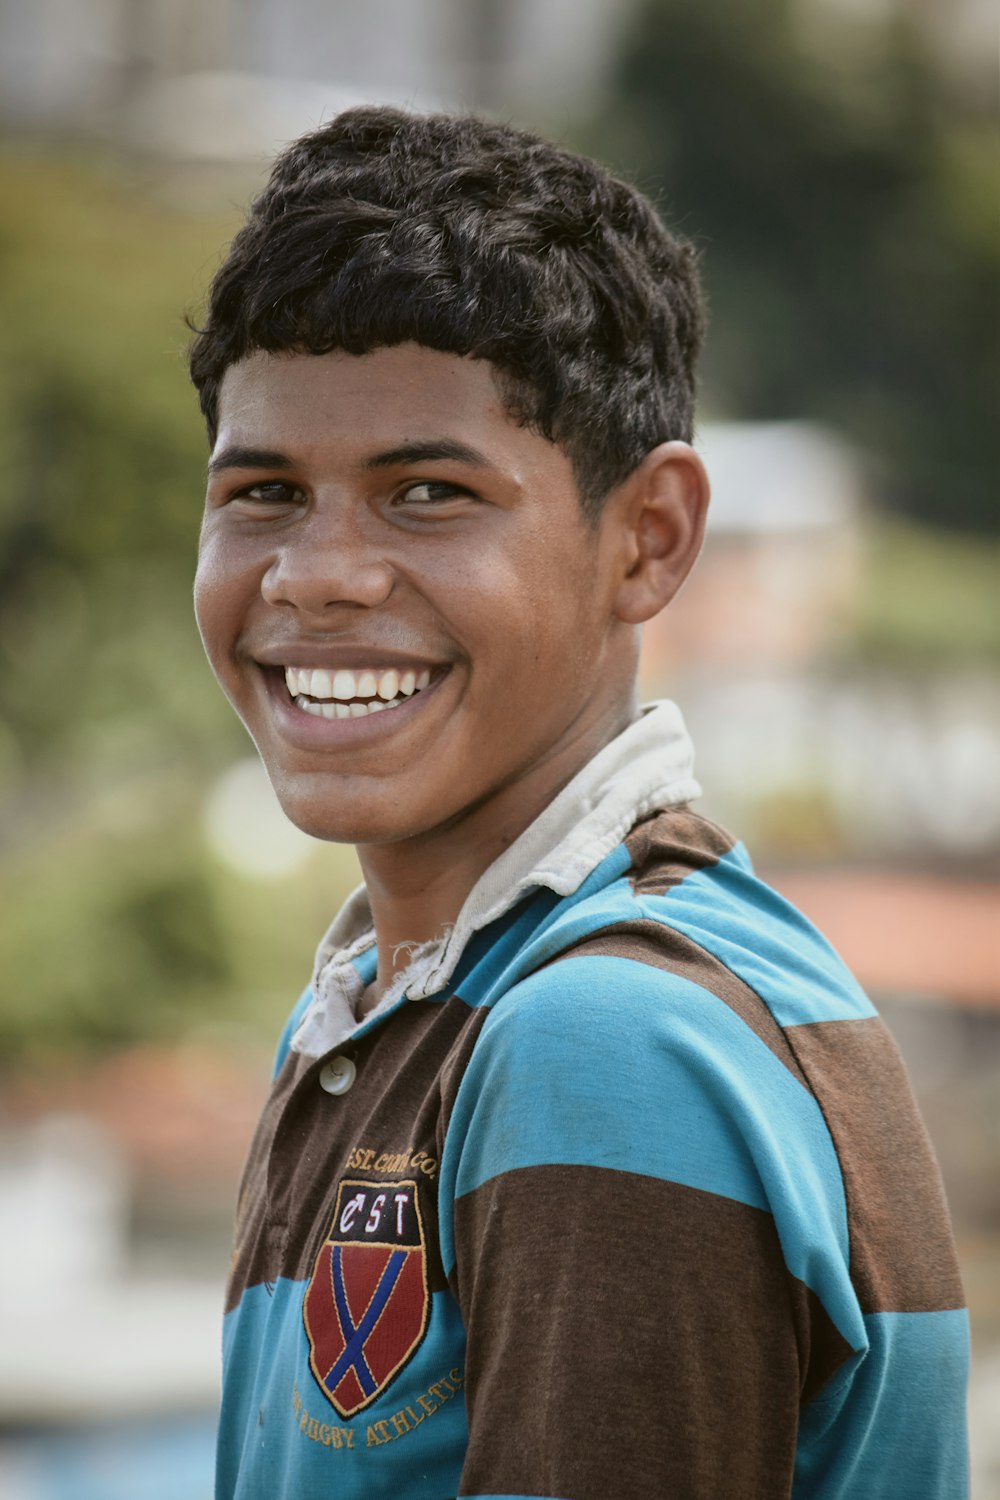 a young boy smiling at the camera